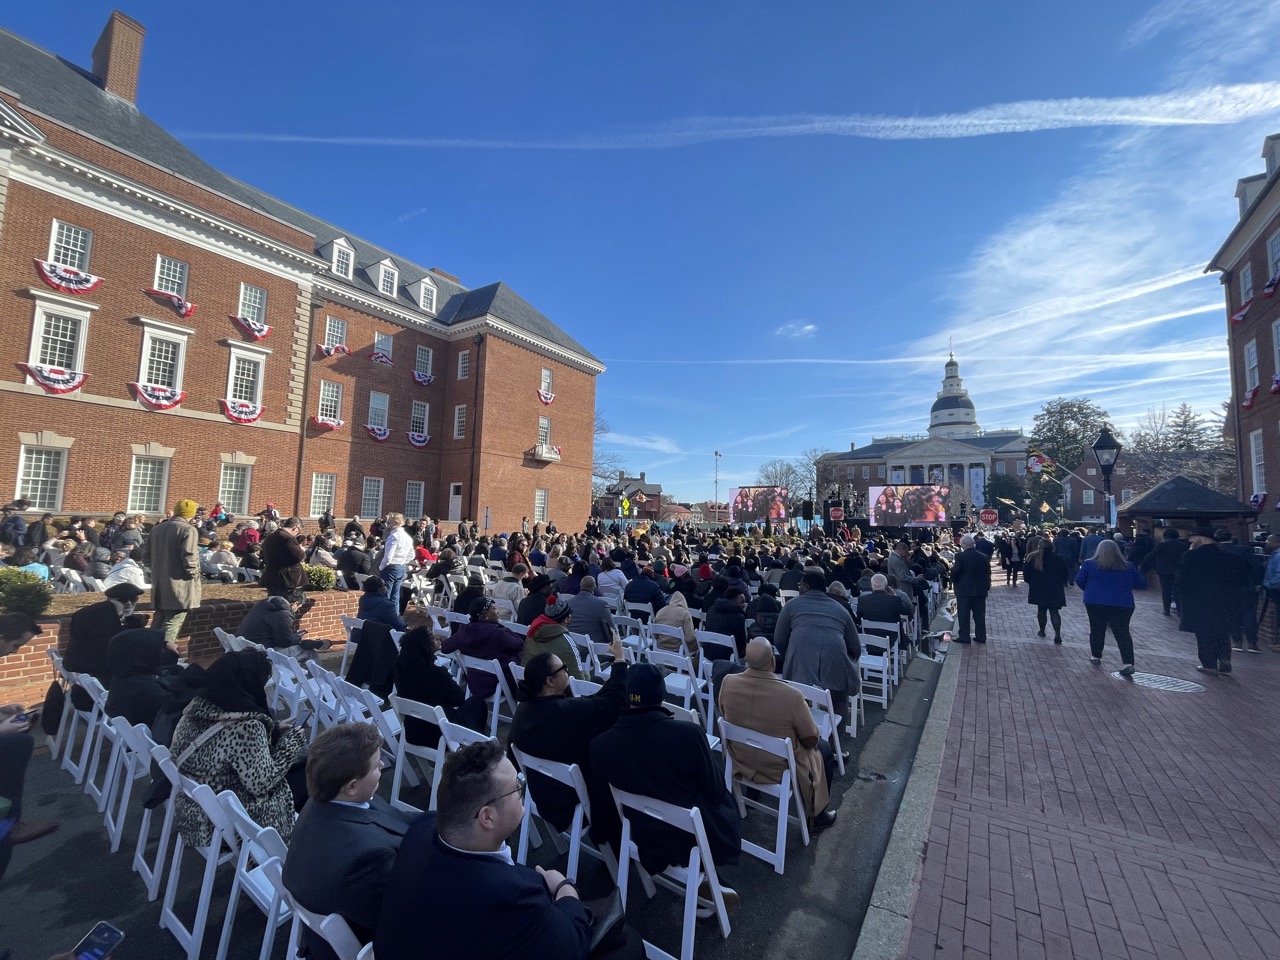 Onlookers await the start of Wes Moore's inauguration at Maryland's State House (Photo by Greg Morton/Capital News Service)